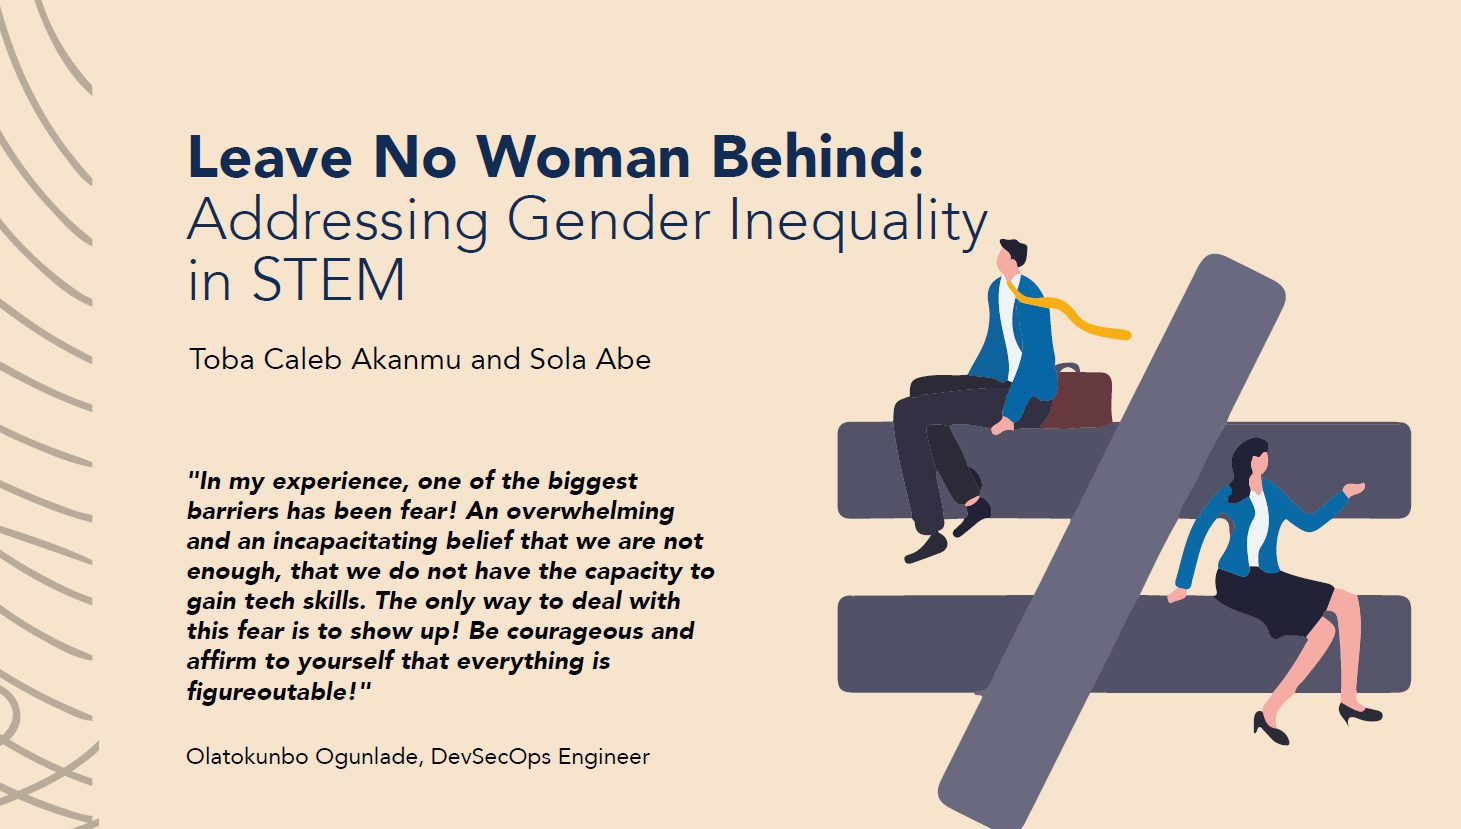 Leave No Woman Behind: Addressing Gender Inequality in STEM